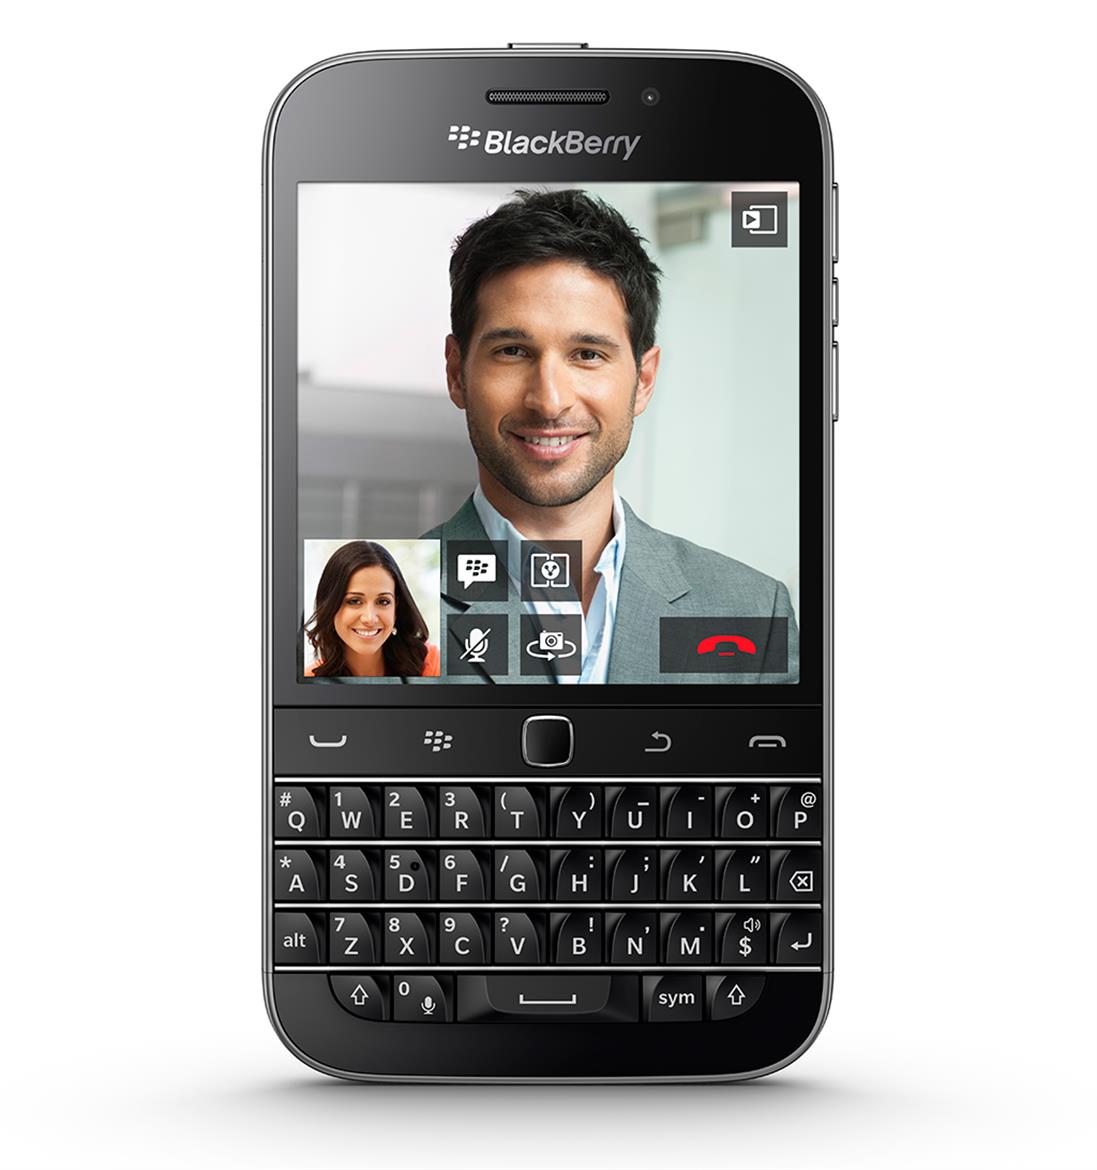 BlackBerry Goes Back To The Future With Launch Of $449 Classic Smartphone